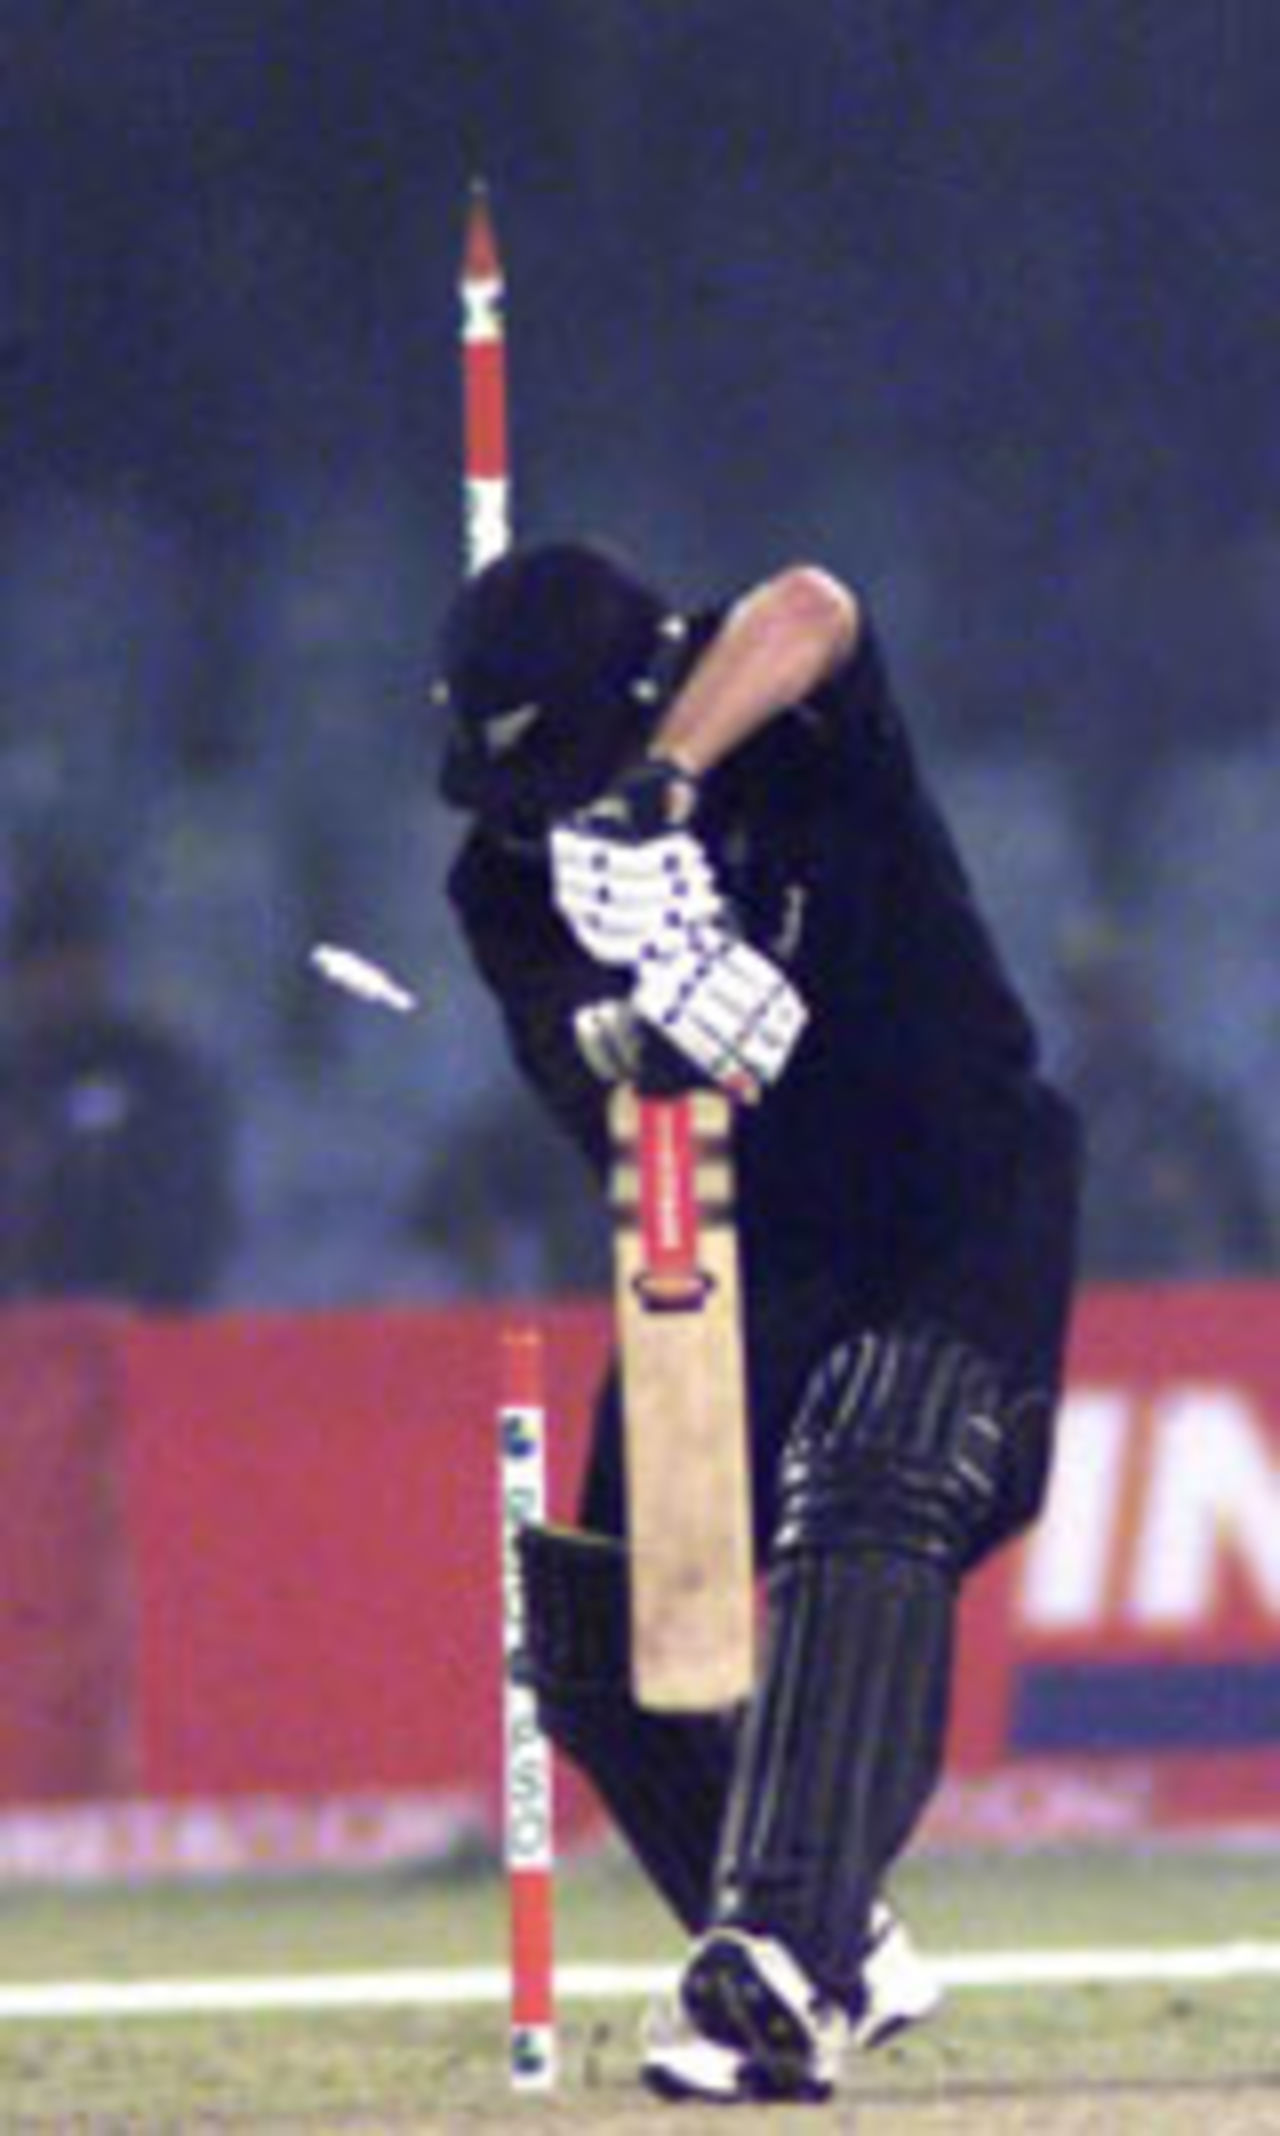 Brendon McCullum has his middle stump inverted by Mohammad Sami during his 5 for 10 spell, Pakistan v New Zealand, 2nd ODI, Lahore, December 1, 2003.